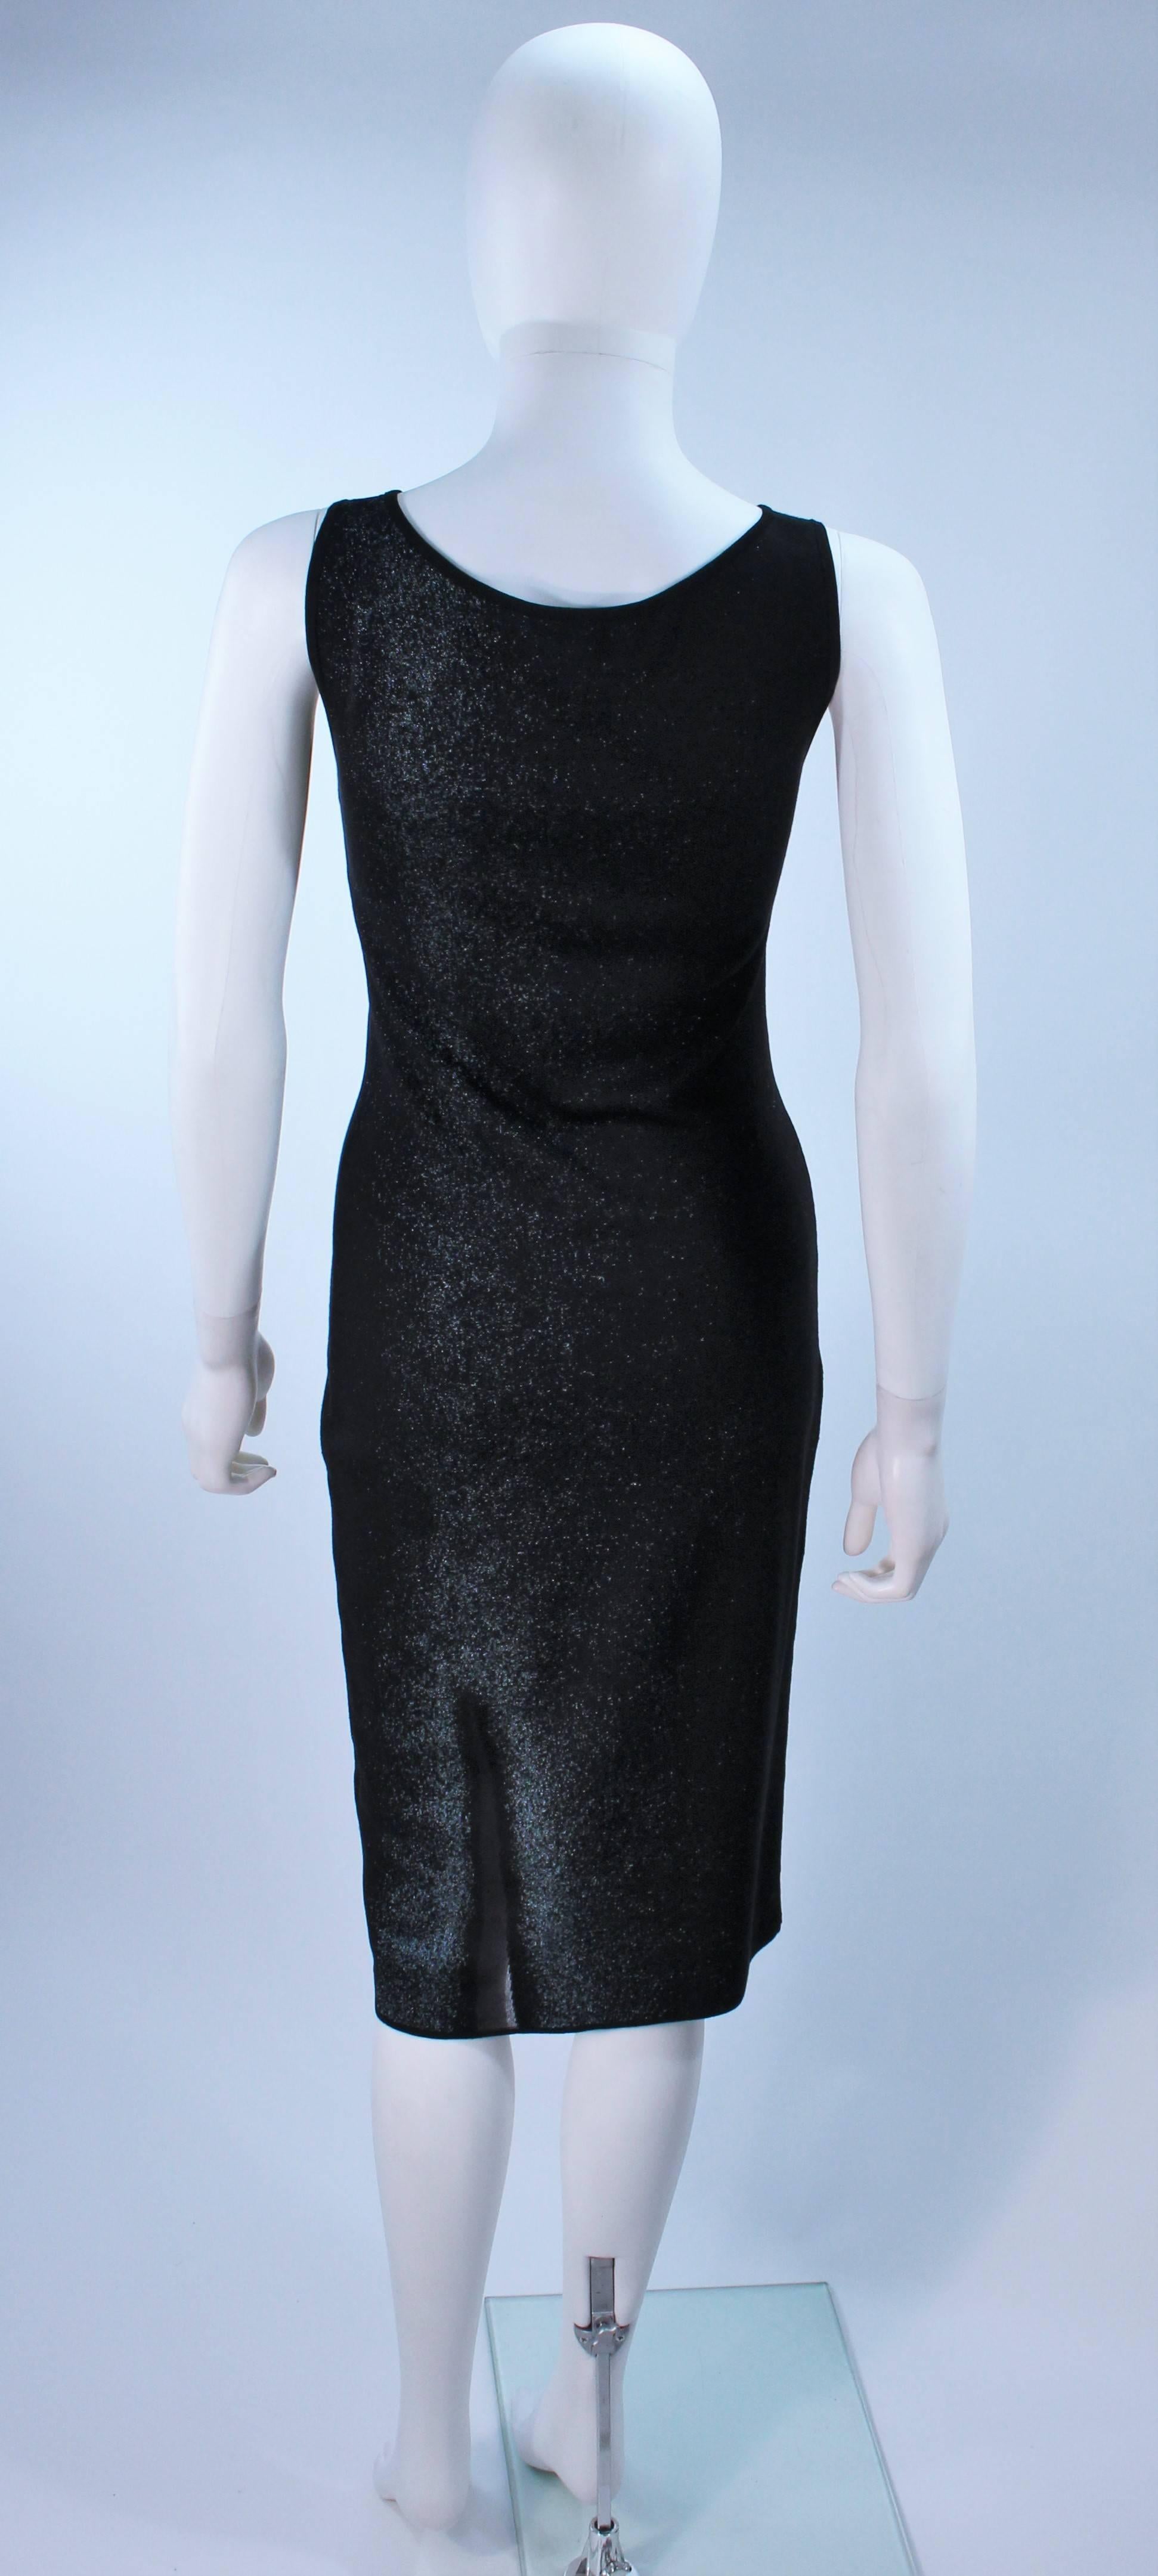 PORTS Black and Navy Metallic Stretch Dress with Sheer Detailing Size XS For Sale 4